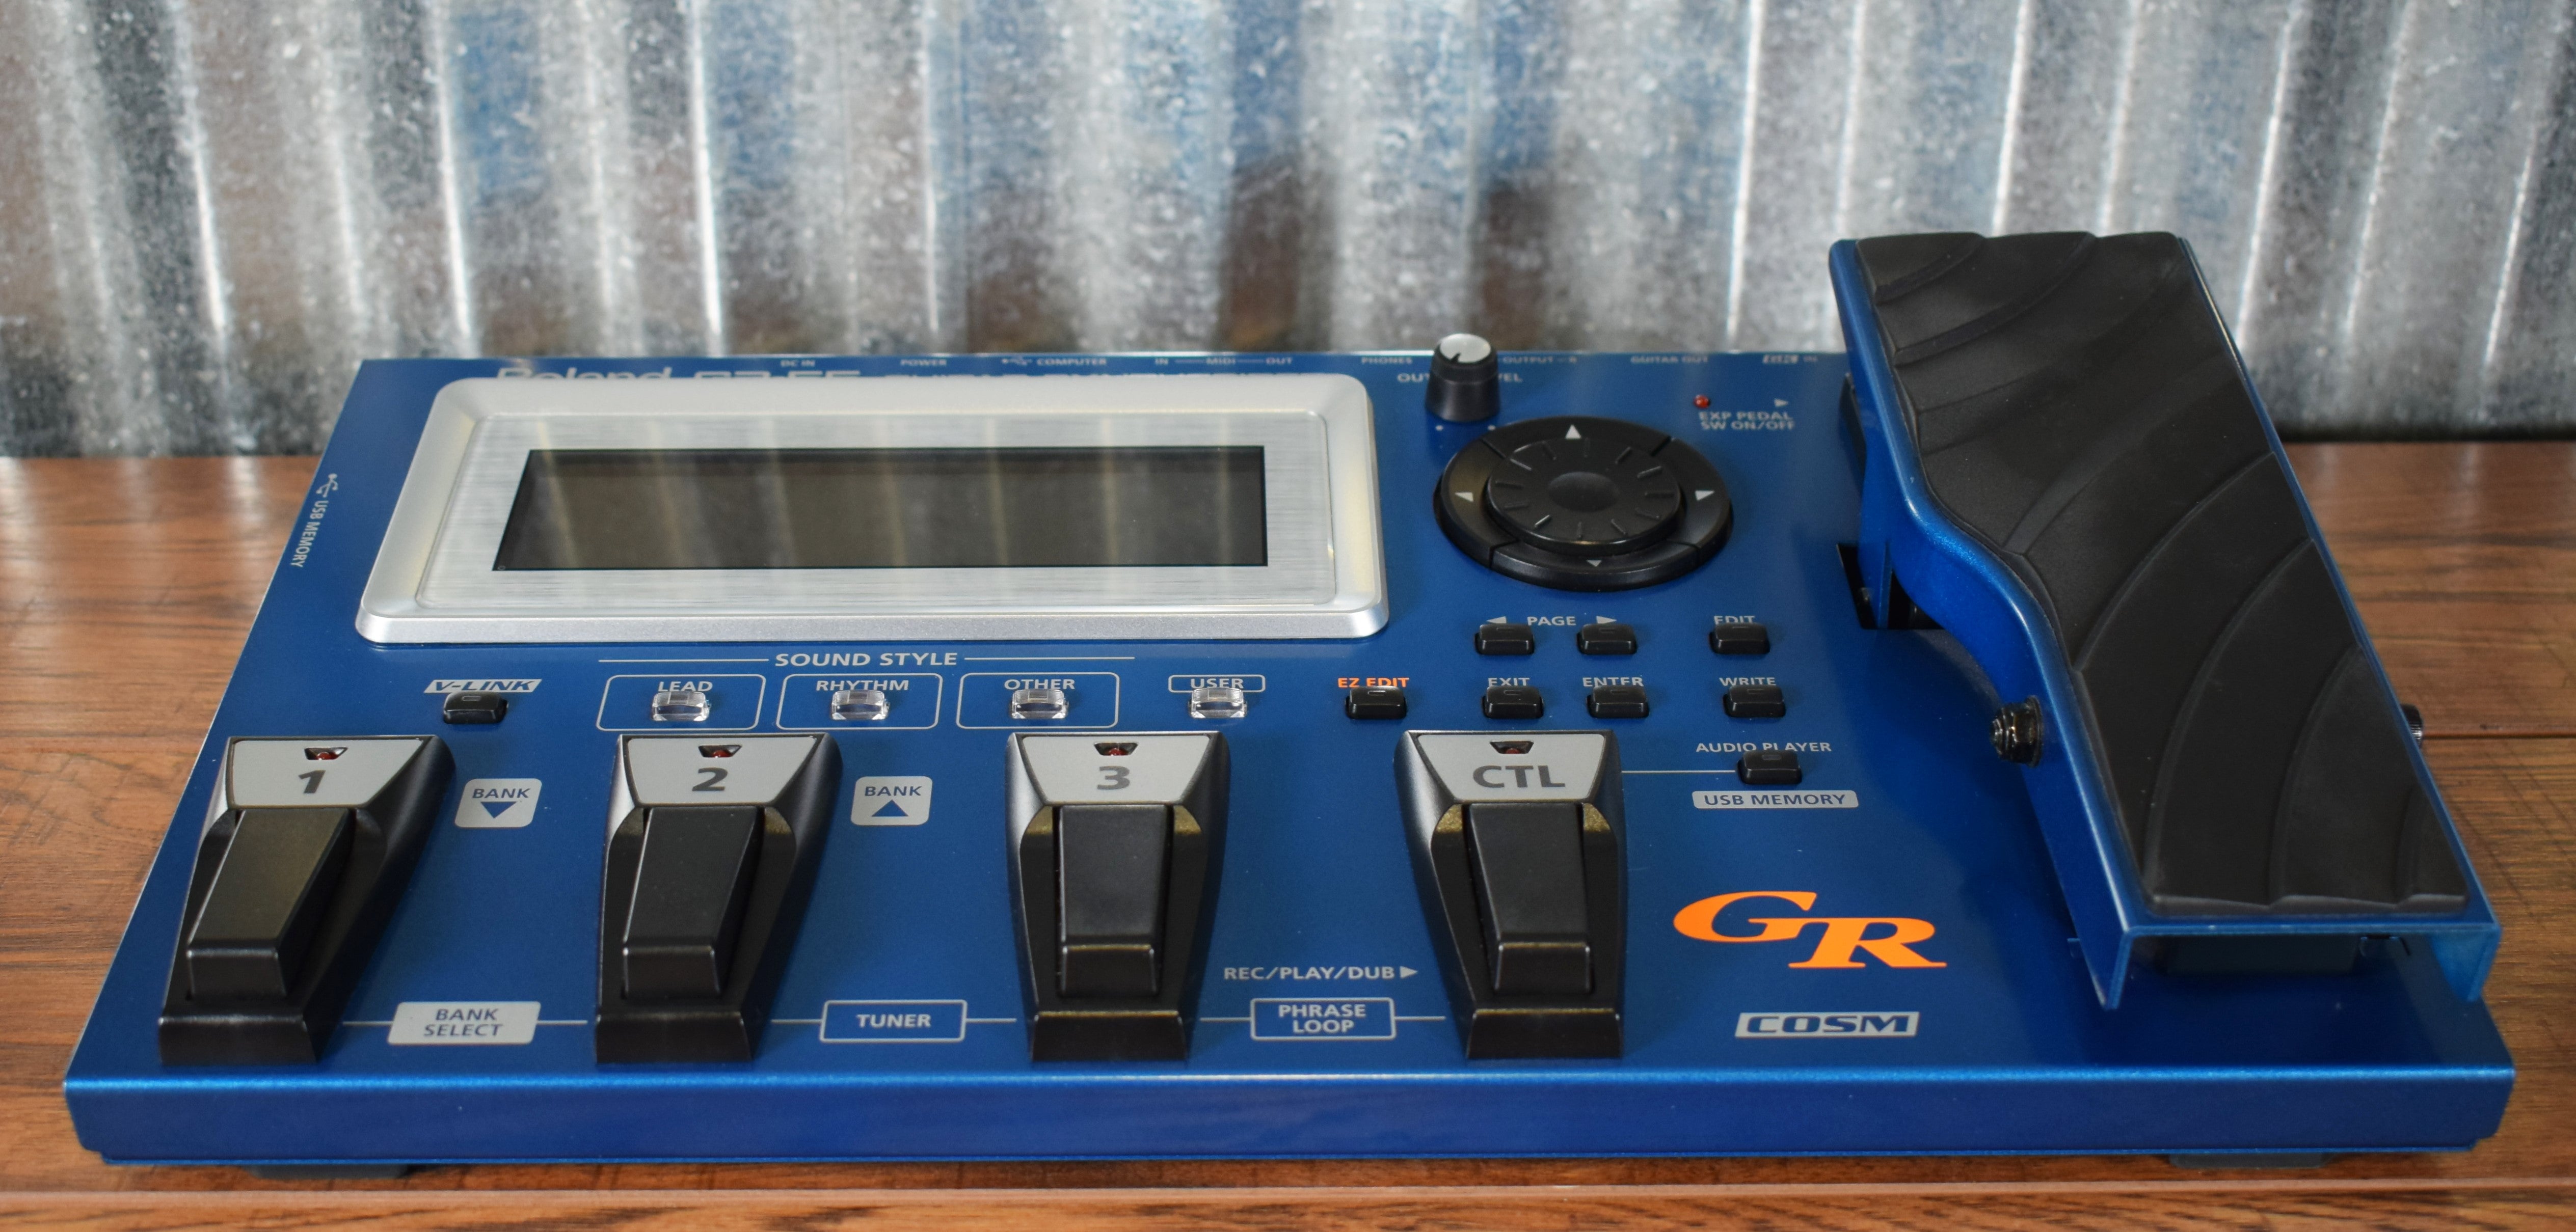 A Roland GR-55 electric guitar synth and Roland GK-3 pickup